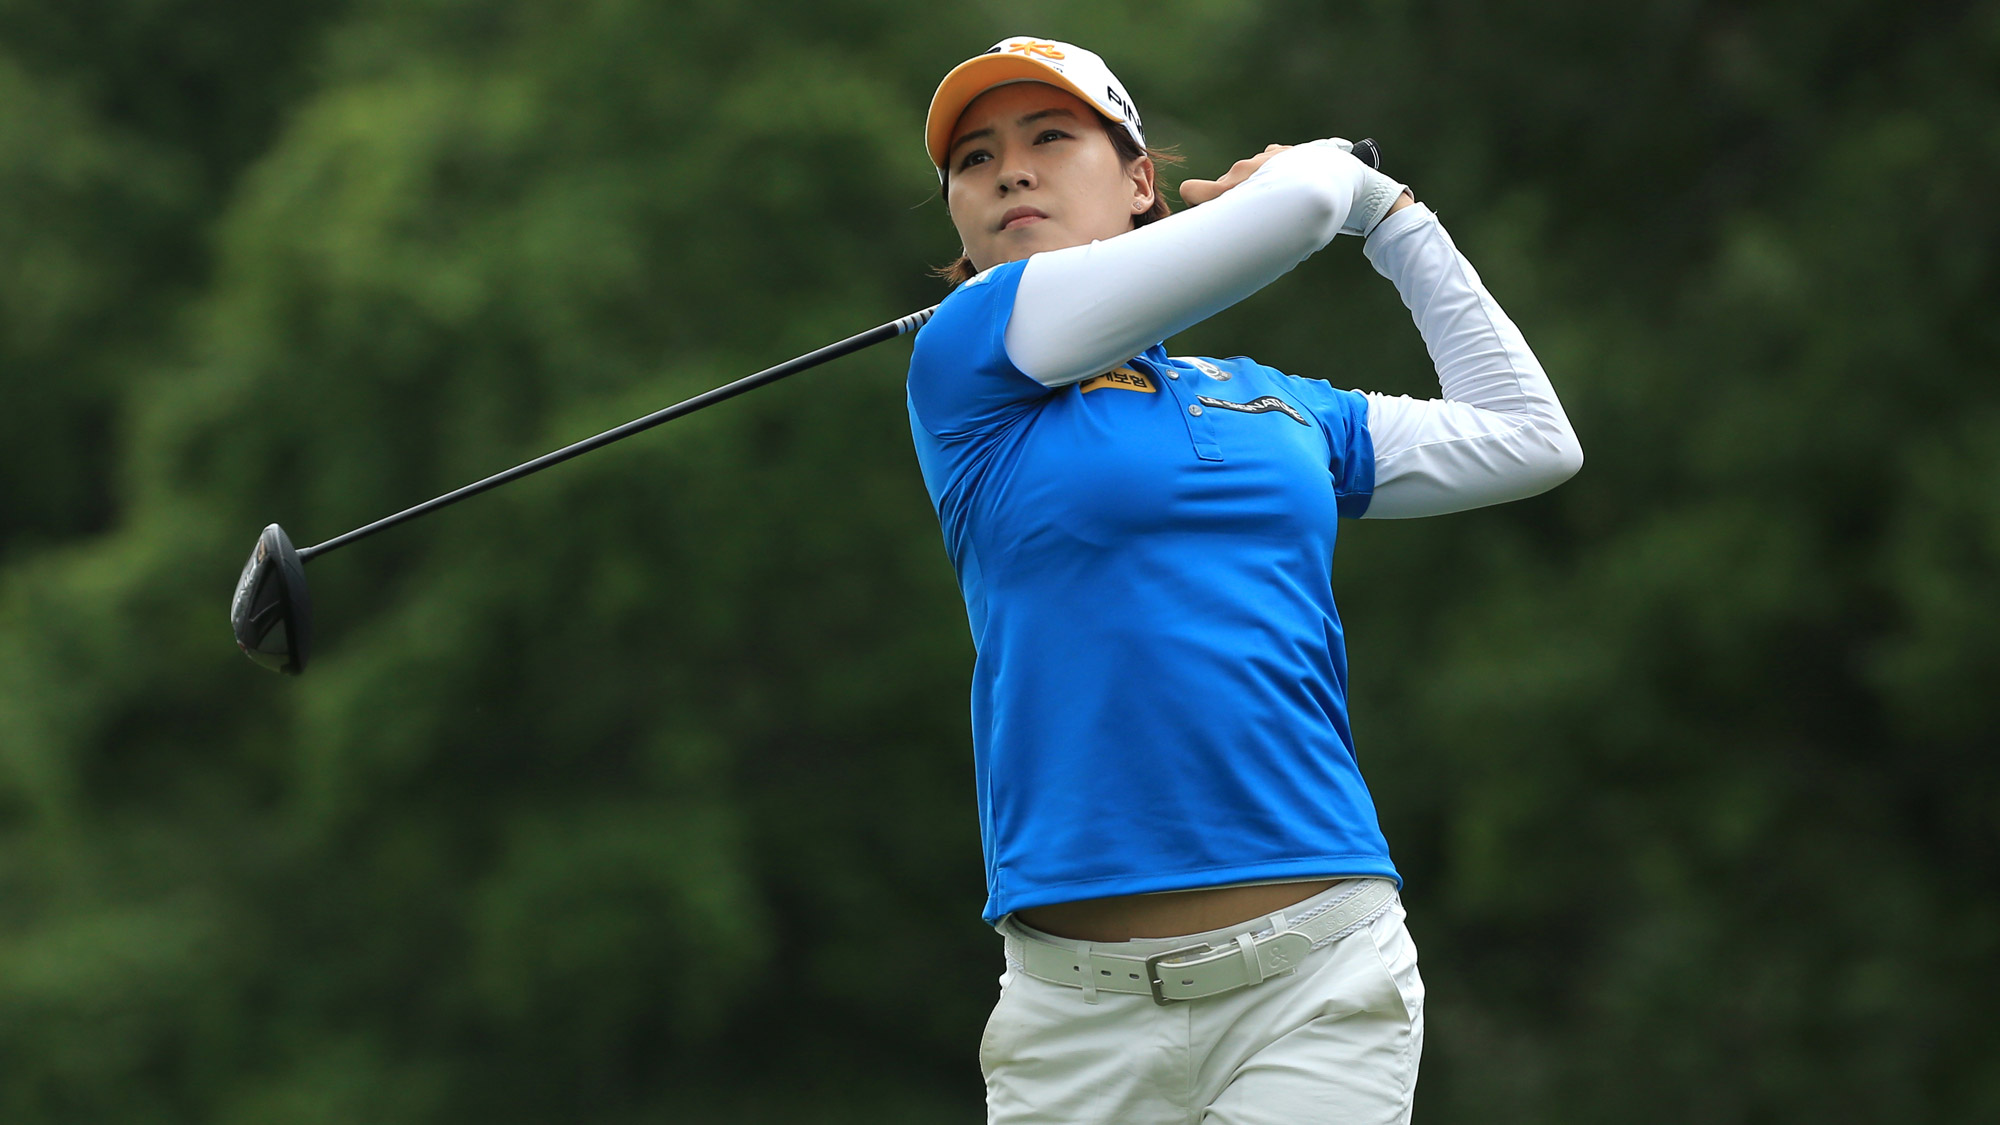 In Gee Chun Gets to 11-Under on Friday in Williamsburg